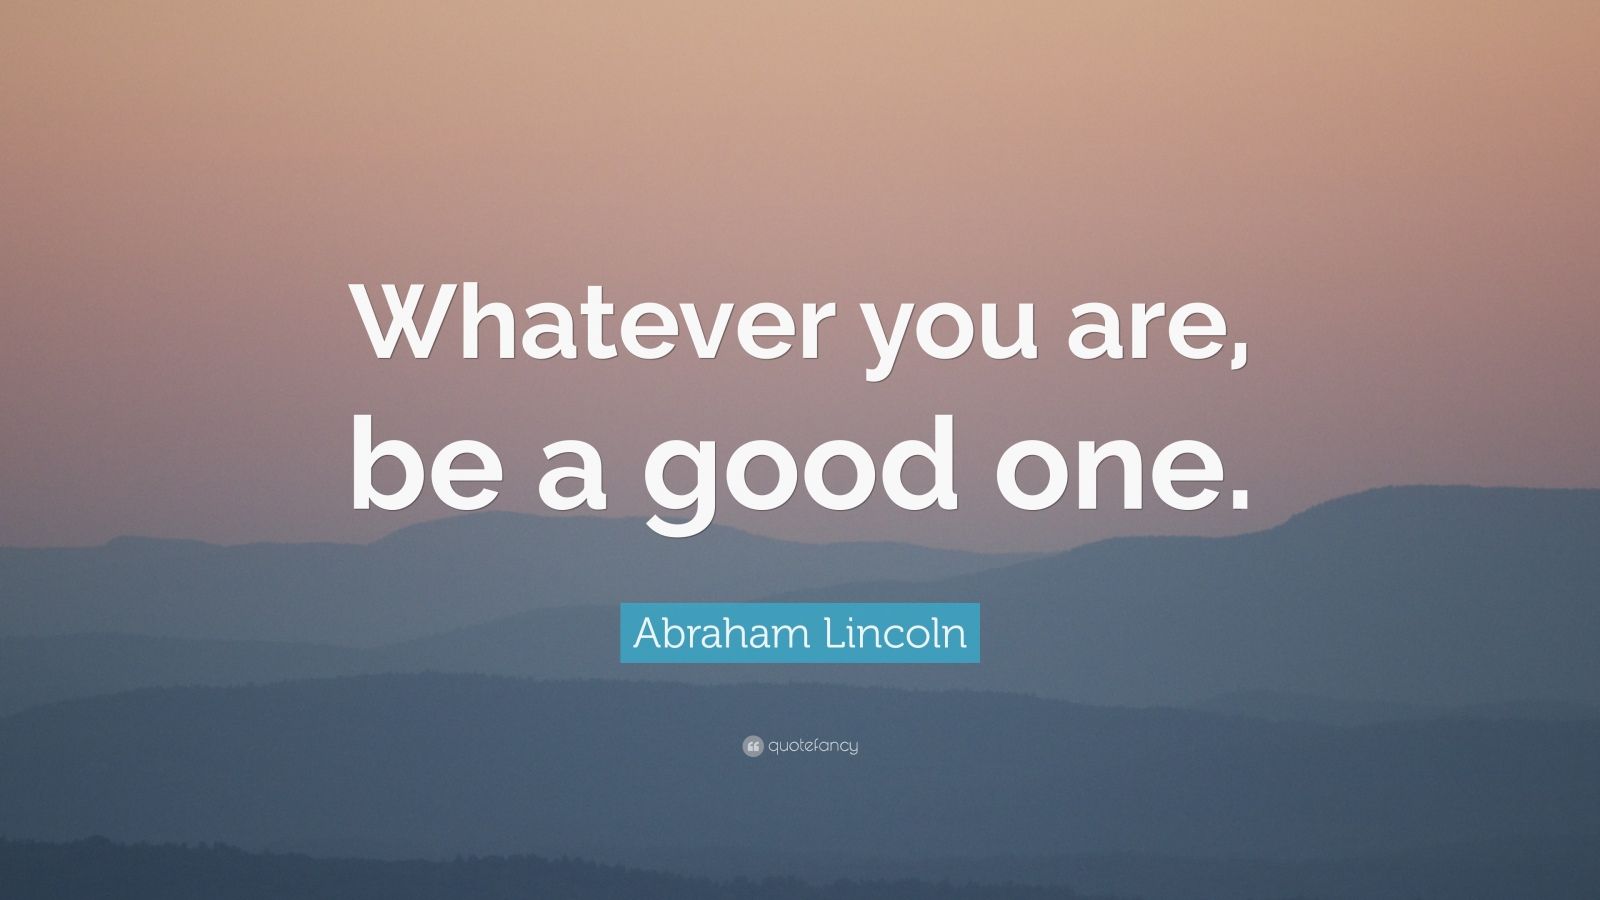 Abraham Lincoln Quote: “Whatever you are, be a good one.” (23 wallpapers) - Quotefancy1600 x 900